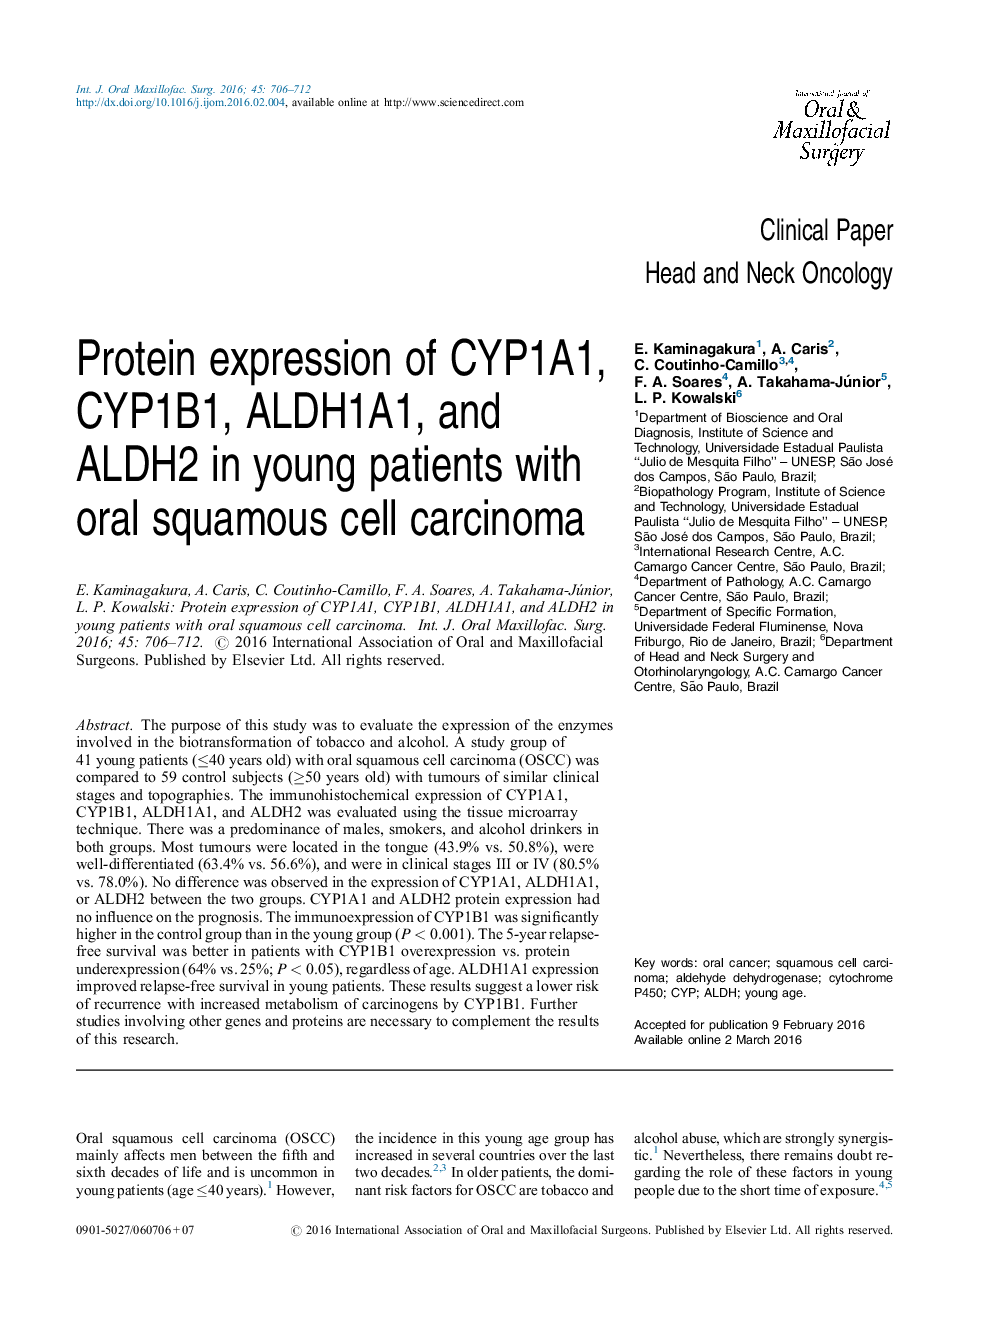 Protein expression of CYP1A1, CYP1B1, ALDH1A1, and ALDH2 in young patients with oral squamous cell carcinoma